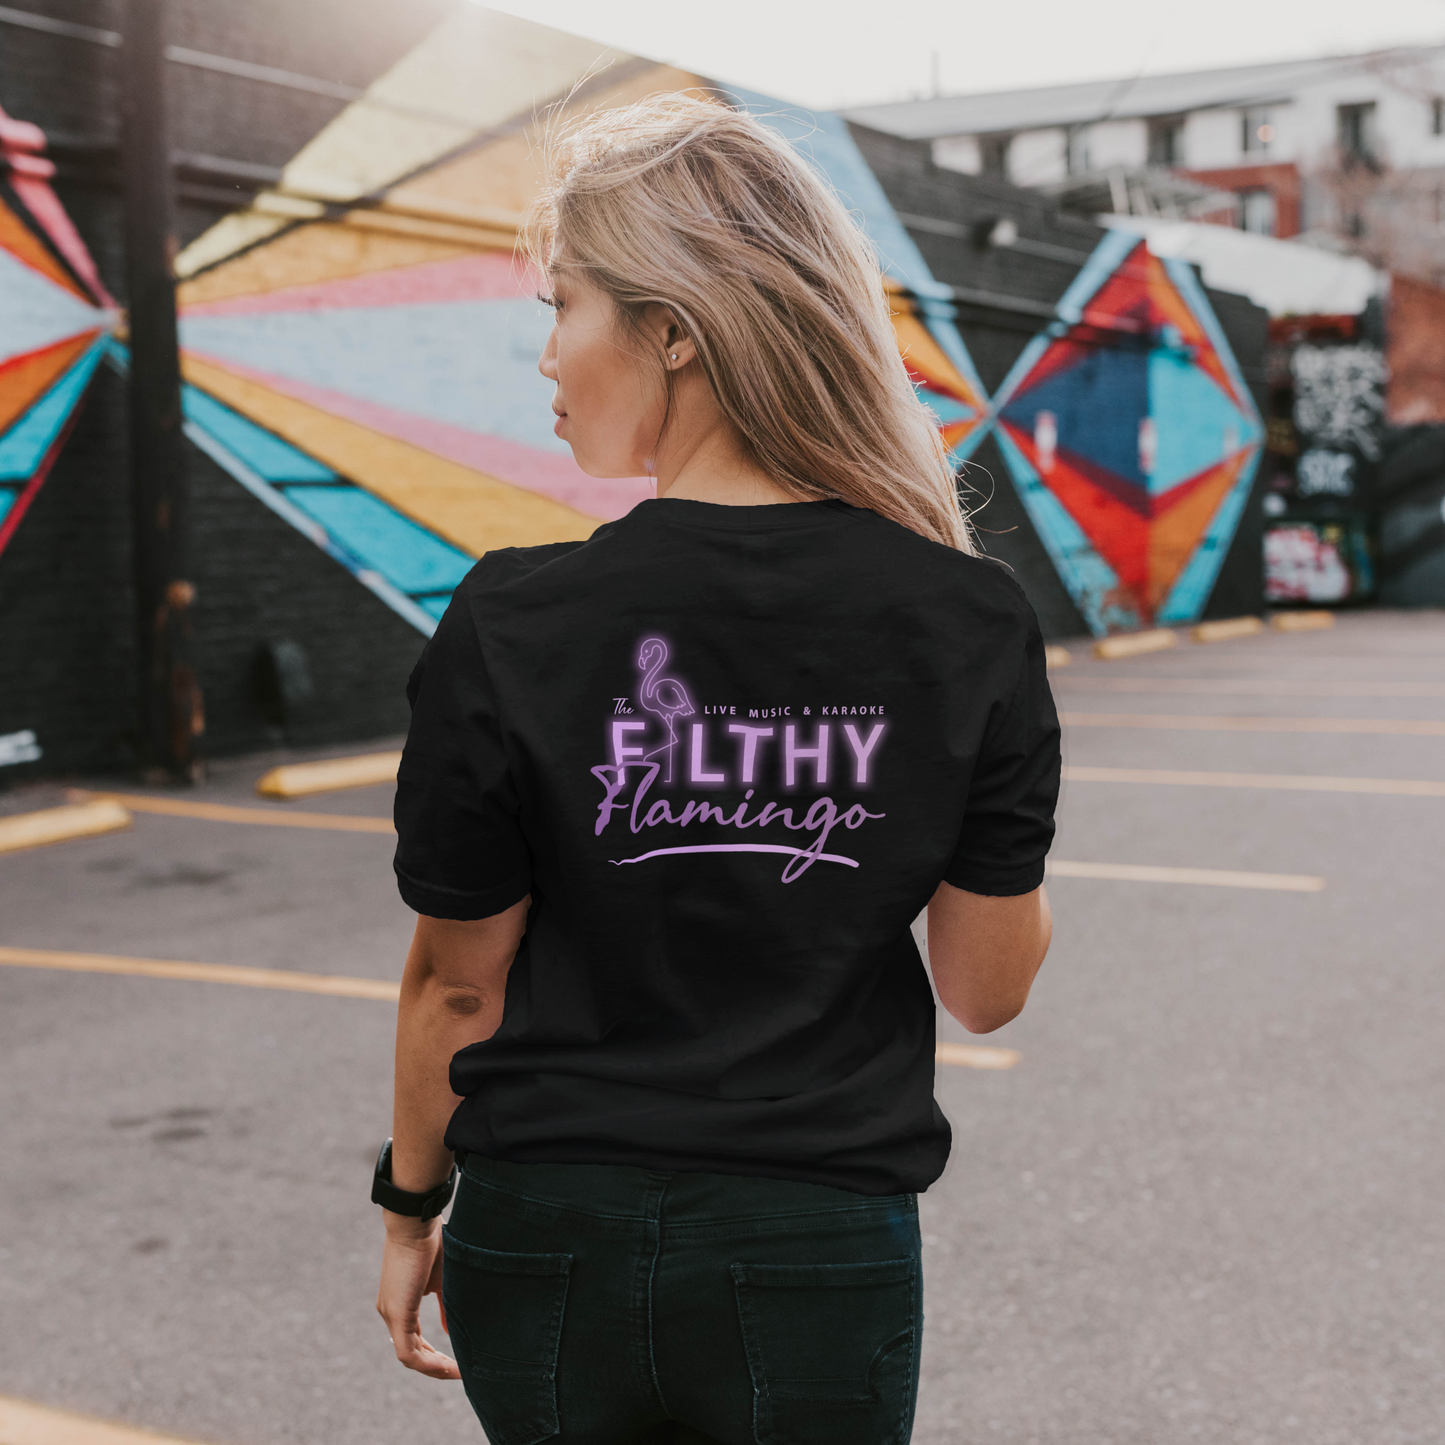 Filthy Flamingo Tee - Officially Licensed Vancouver Storm Series